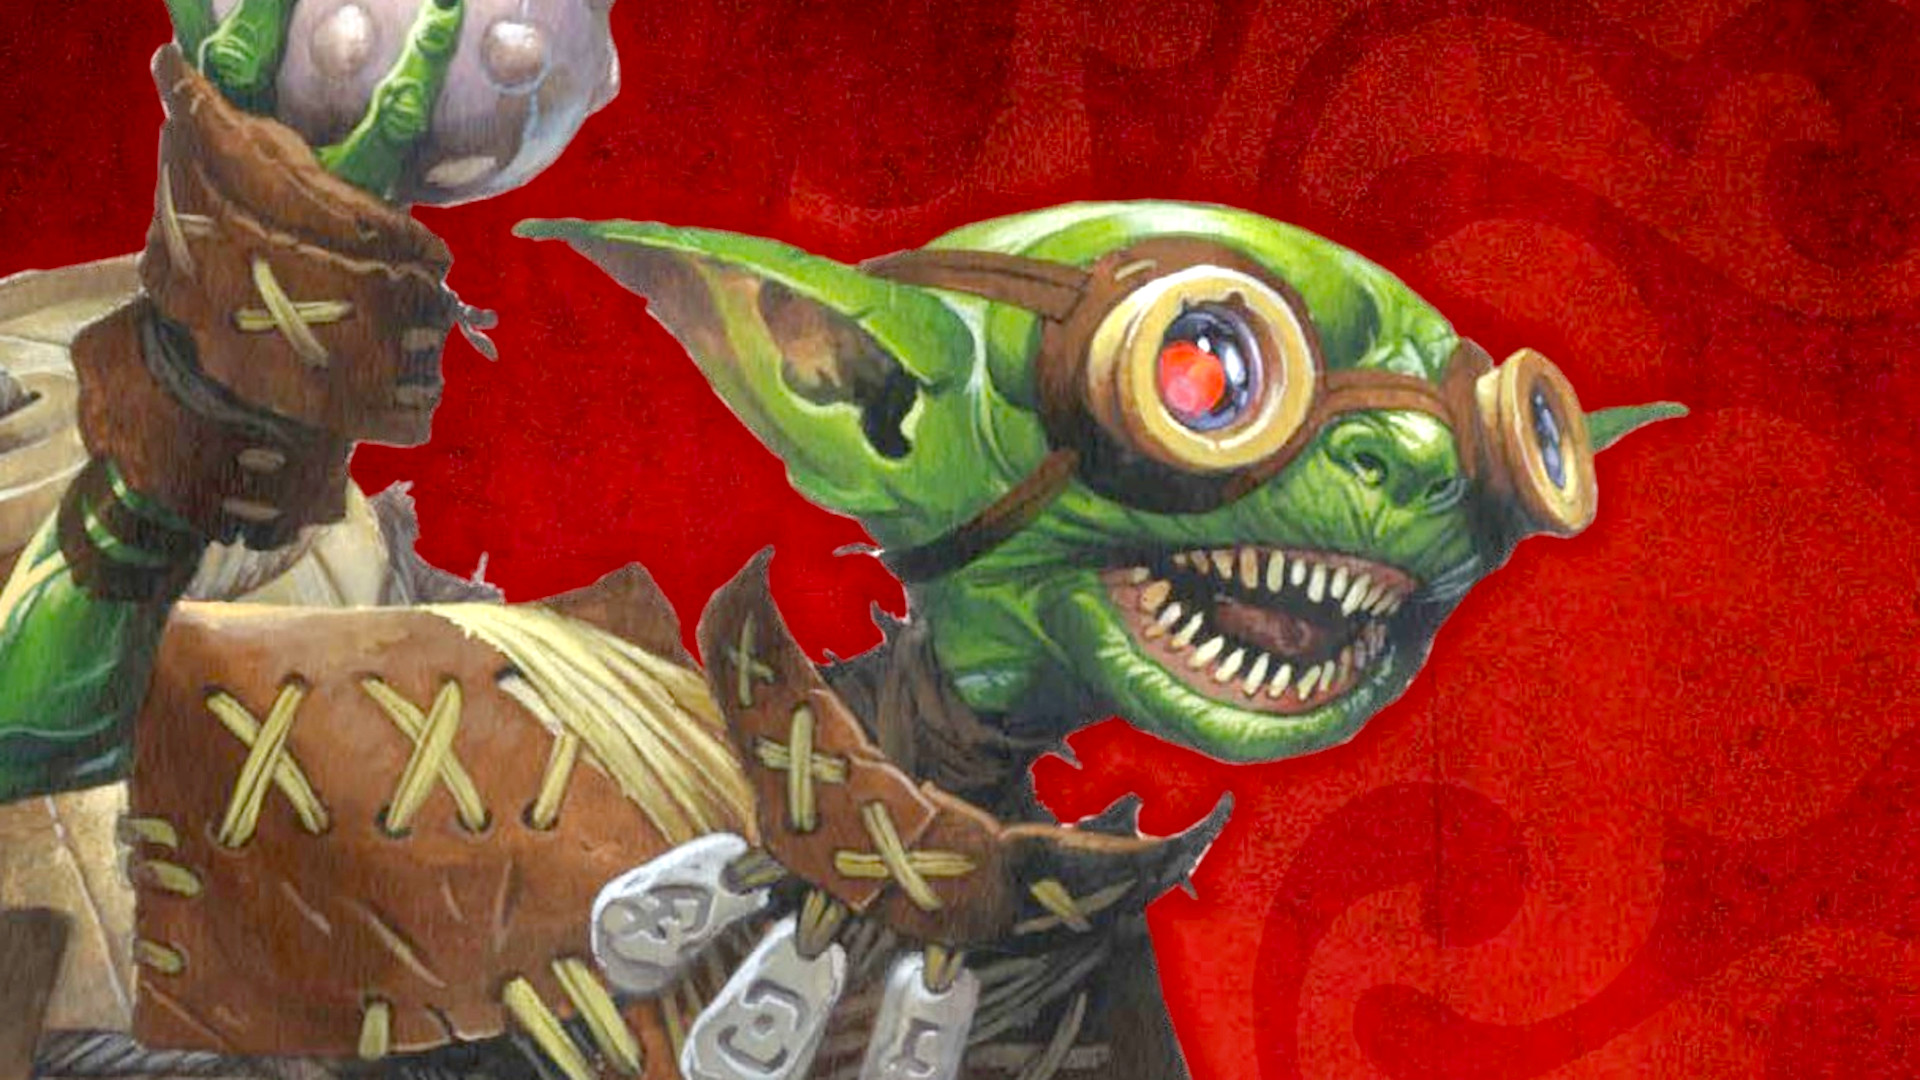 Why You should play Goloma in Pathfinder 2e or Dungeons and Dragons